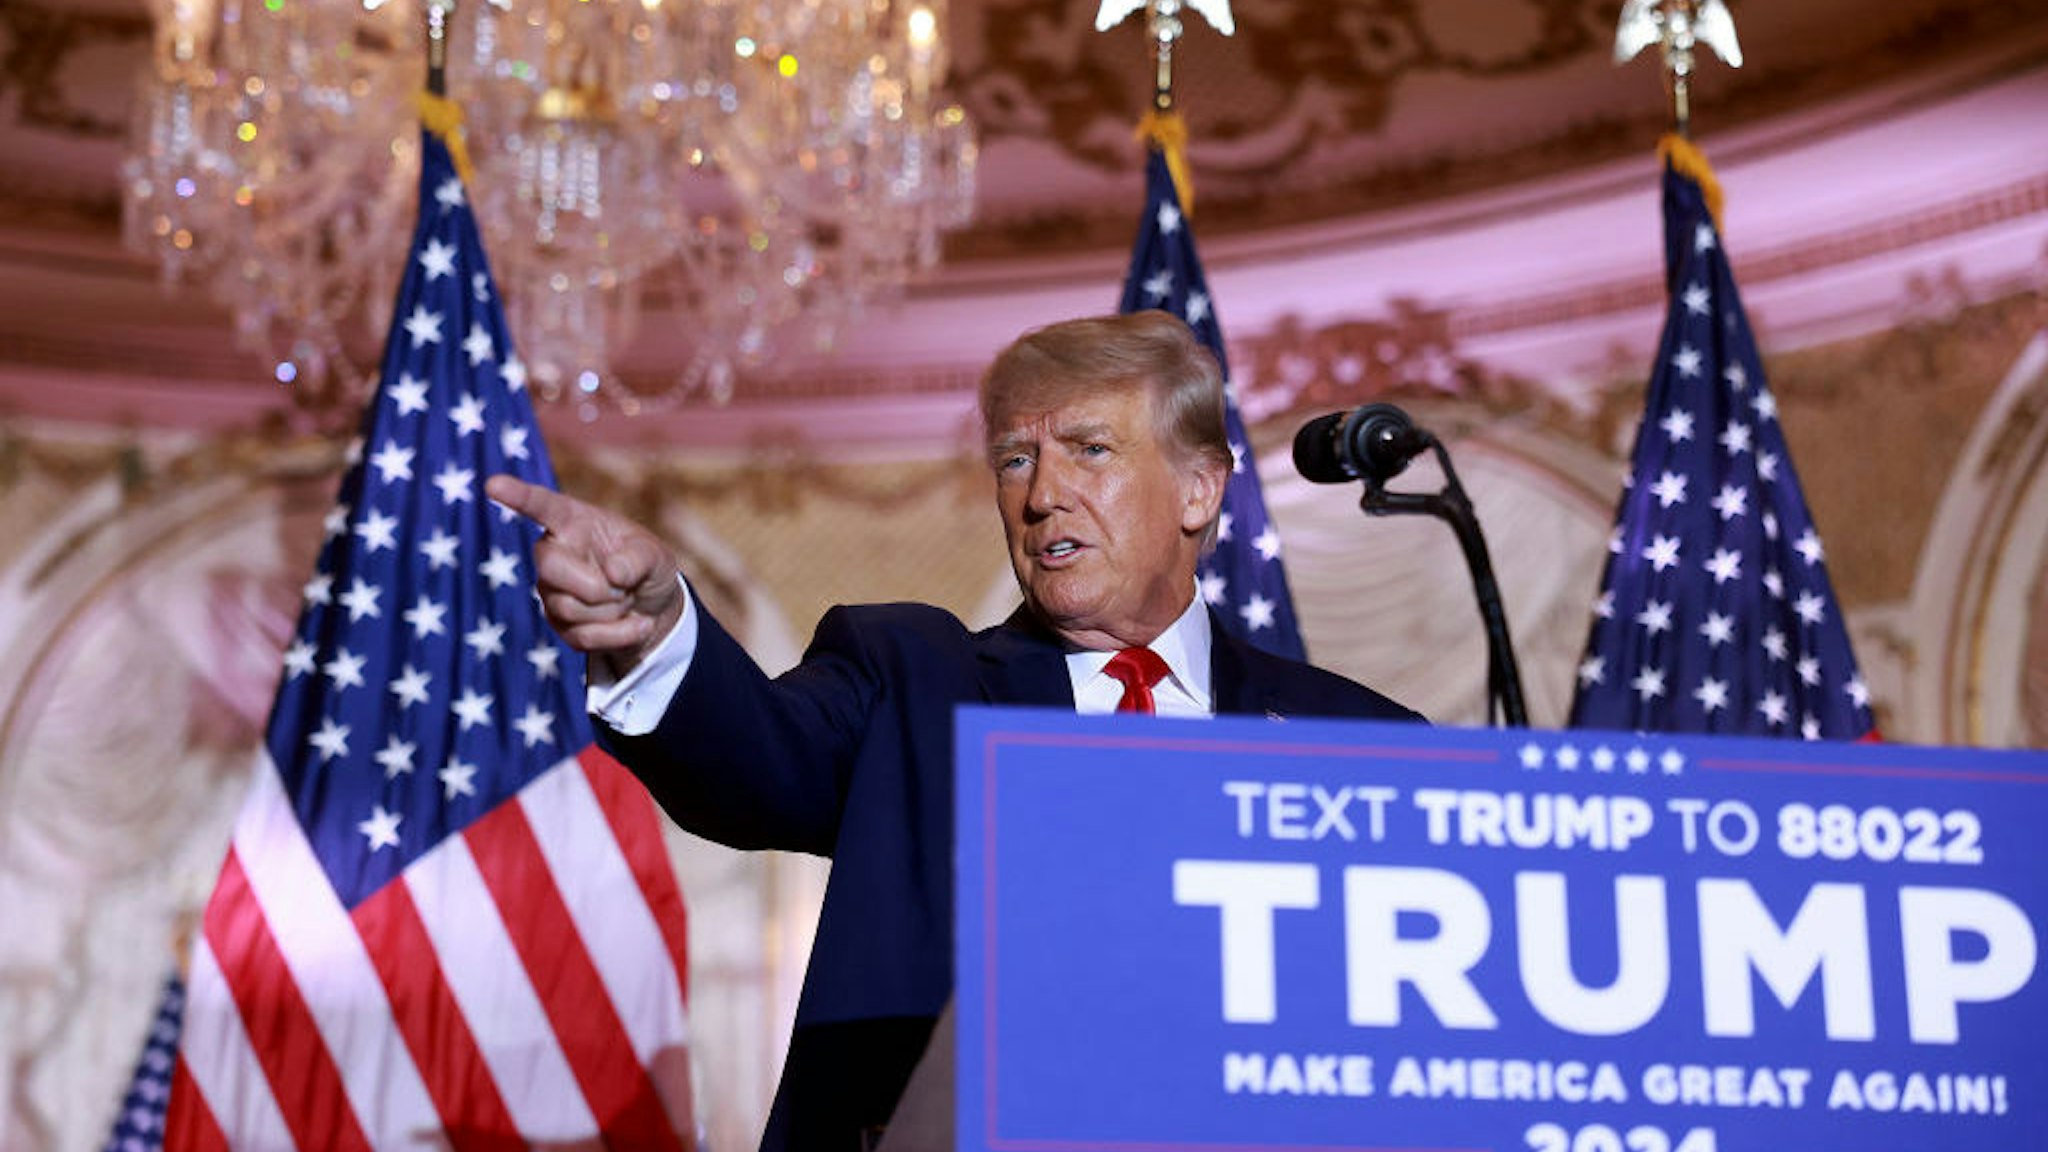 PALM BEACH, FLORIDA - NOVEMBER 15: Former U.S. President Donald Trump speaks during an event at his Mar-a-Lago home on November 15, 2022 in Palm Beach, Florida. Trump announced that he was seeking another term in office and officially launched his 2024 presidential campaign. (Photo by Joe Raedle/Getty Images)